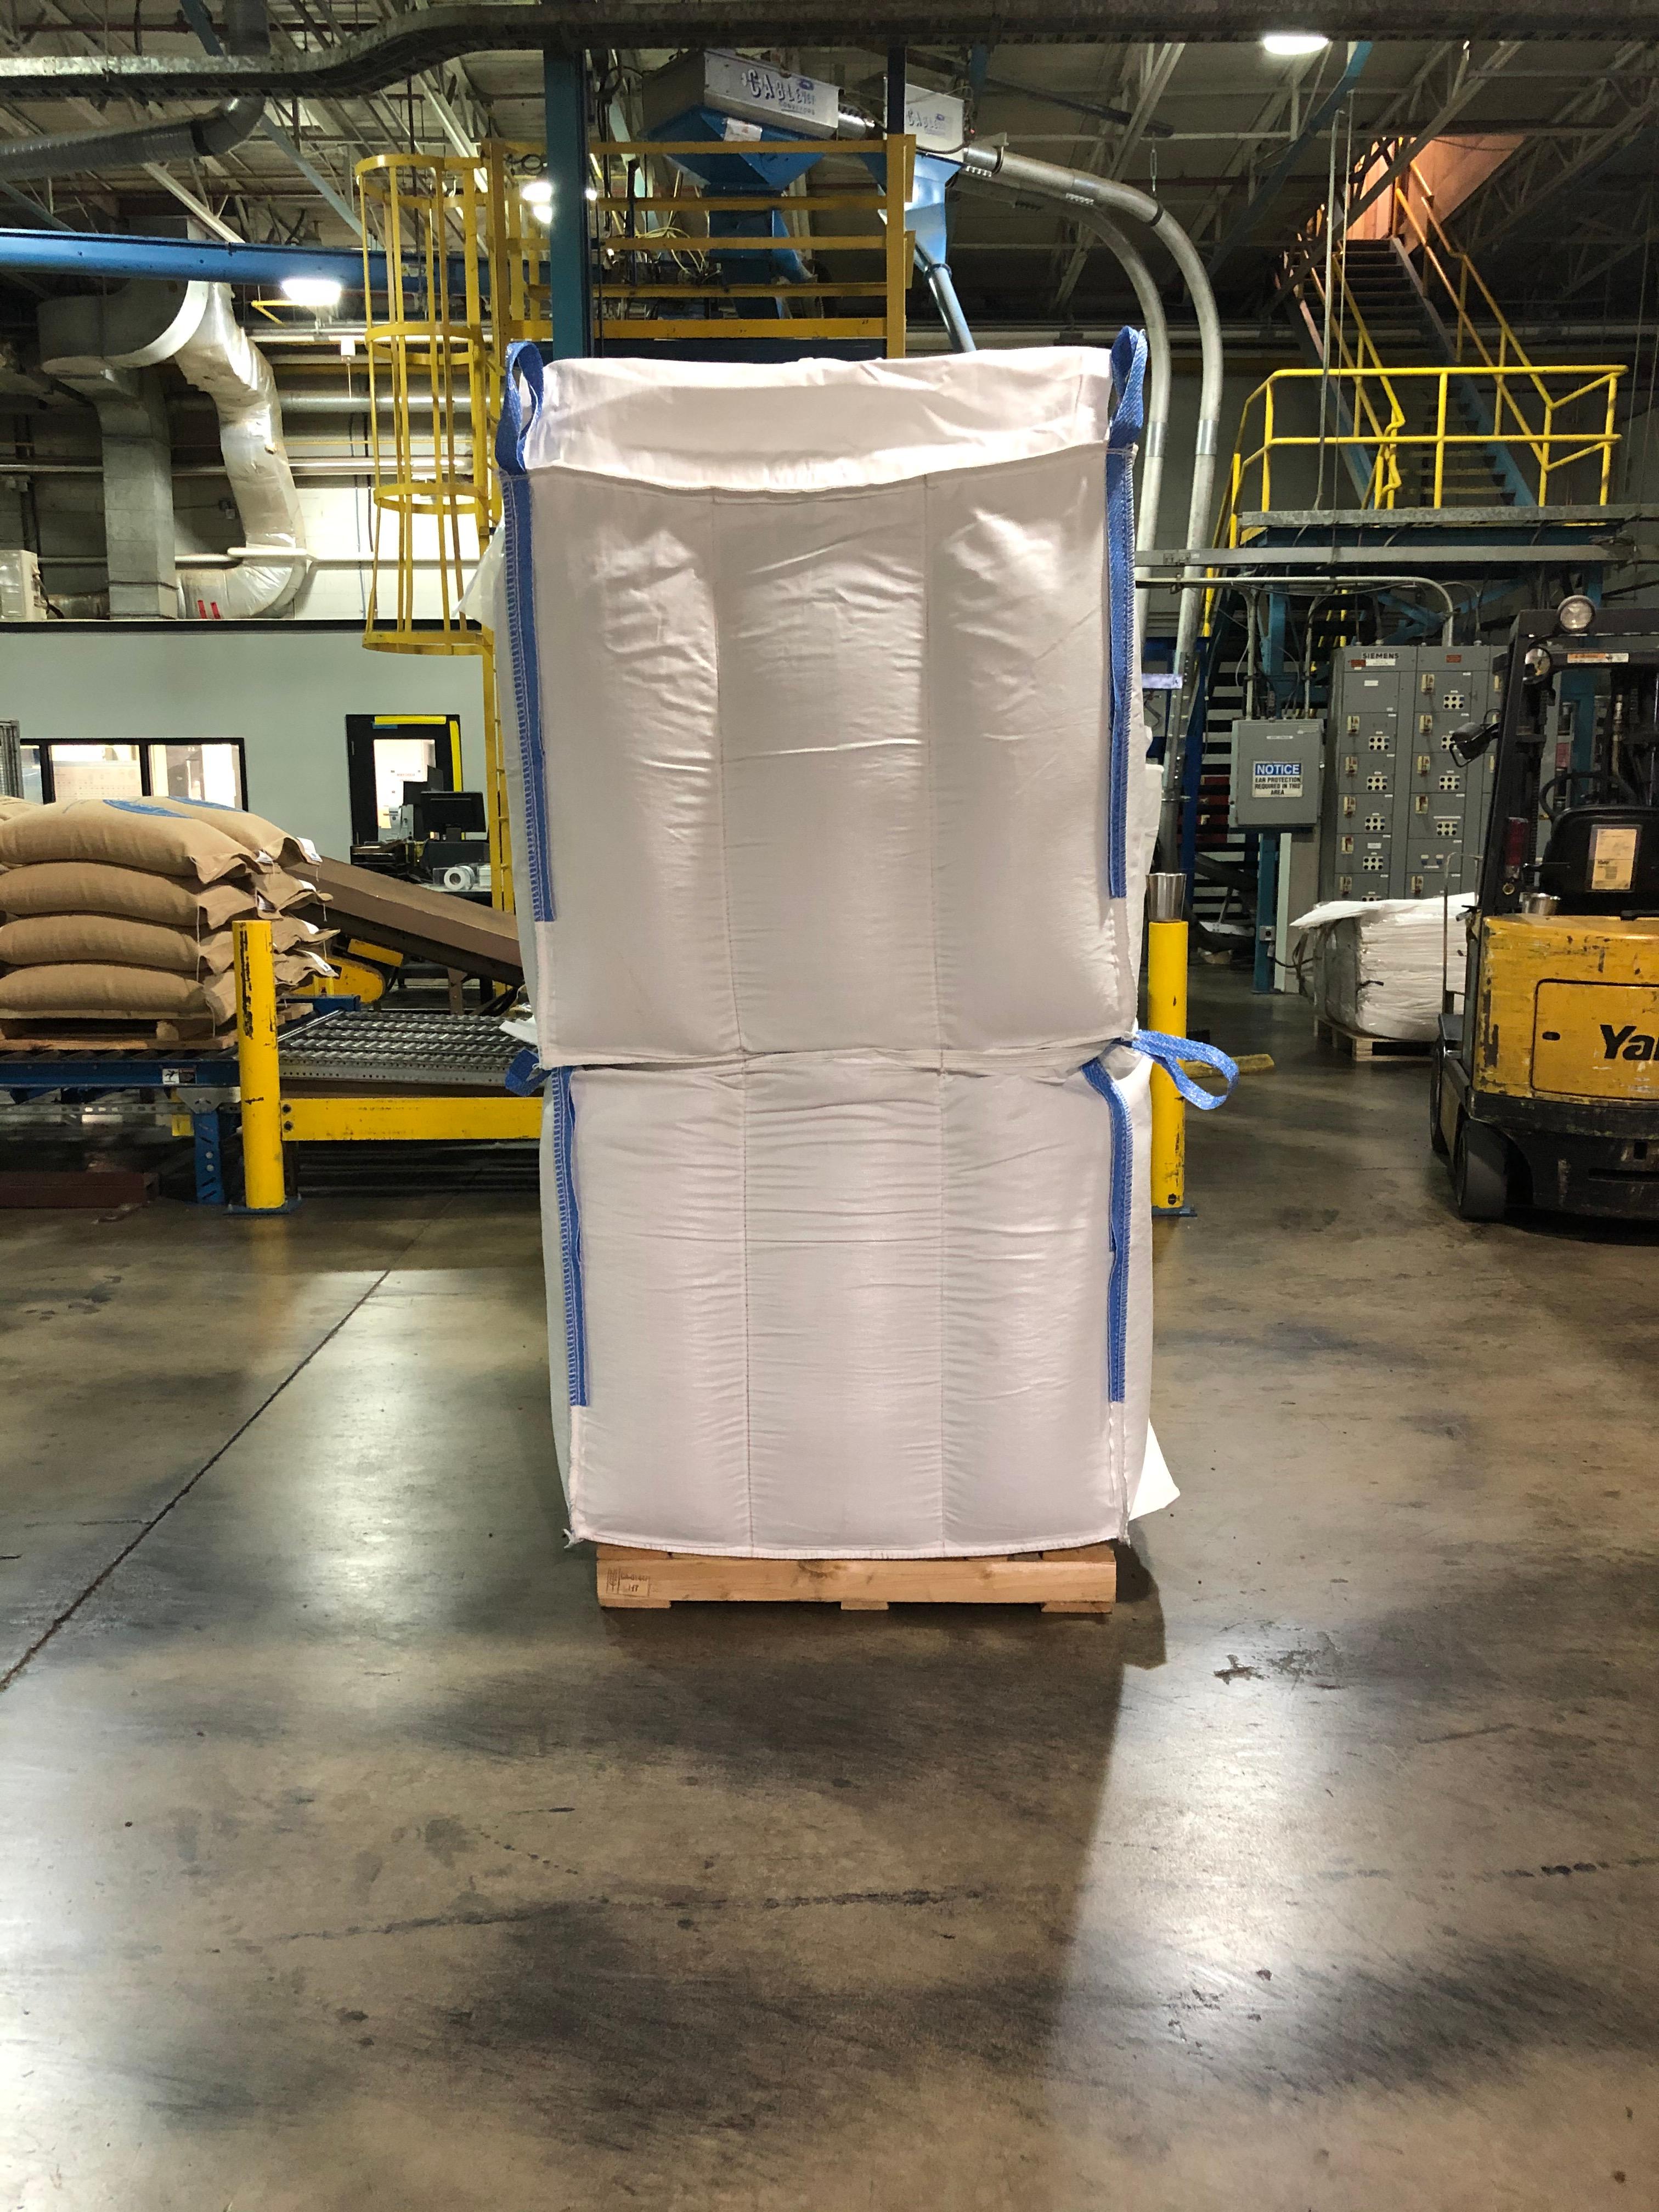 Two baffle-like bags stacked on top of each other.